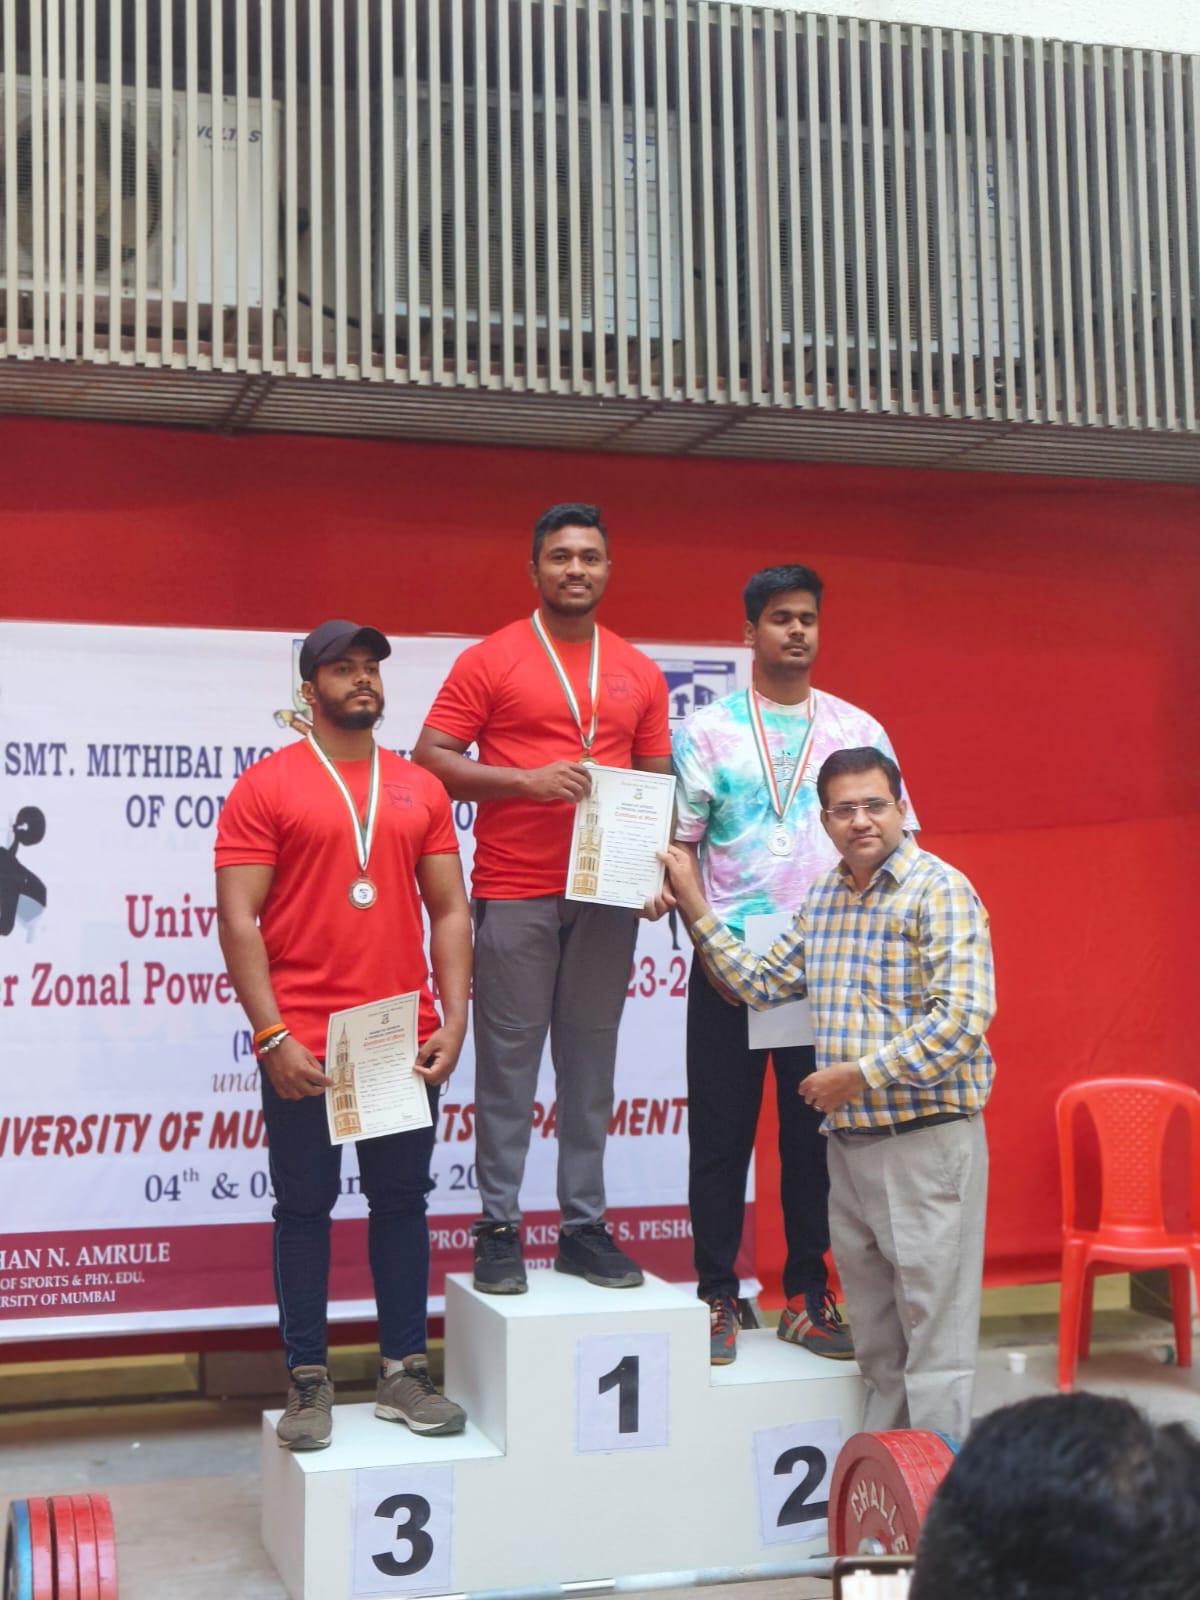 Devgad College's second year cadets Rushikesh Teli won gold medal at Mumbai University powerlifting competition. His total lift is: 587.5 kg.